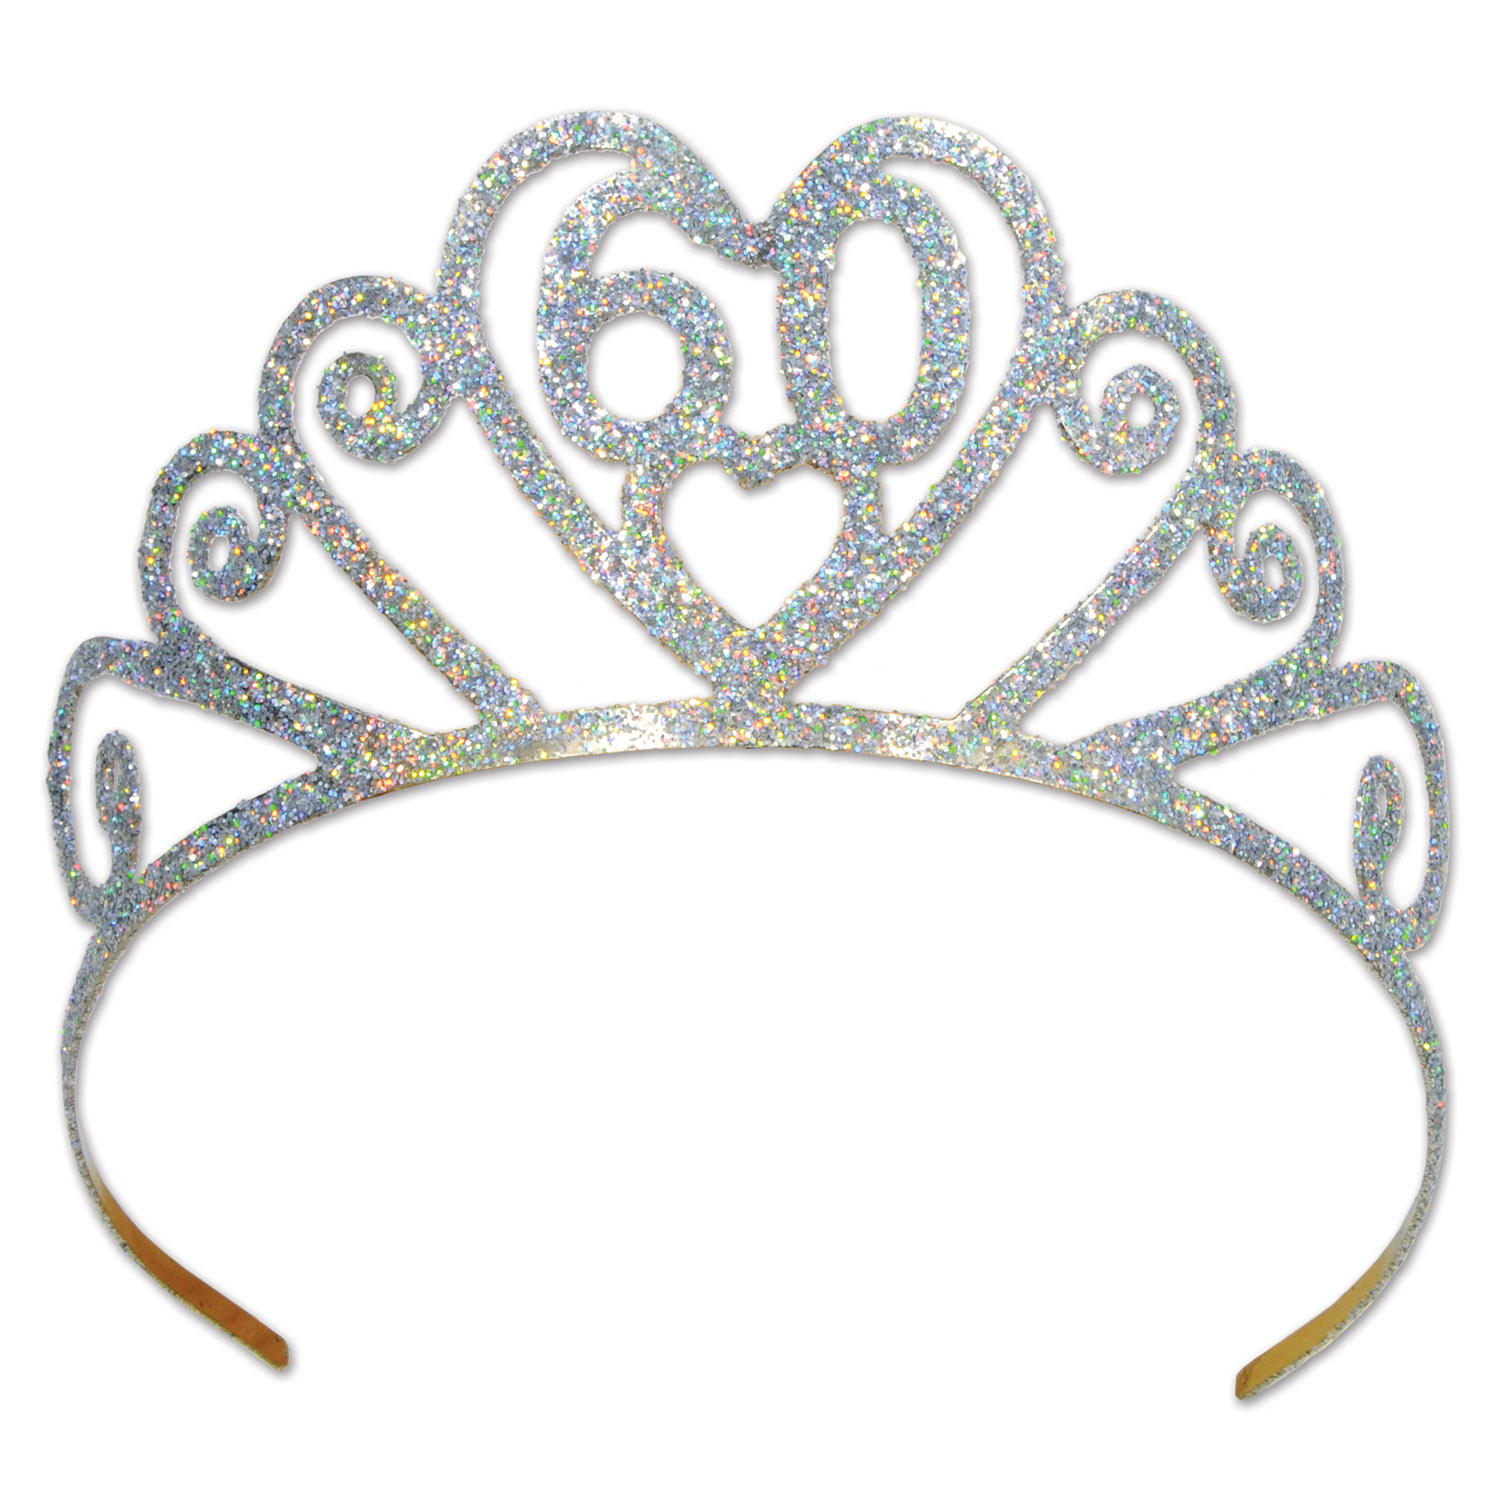 Glittered Metal 60 Tiara (2 attachable combs included) - Webhats.com